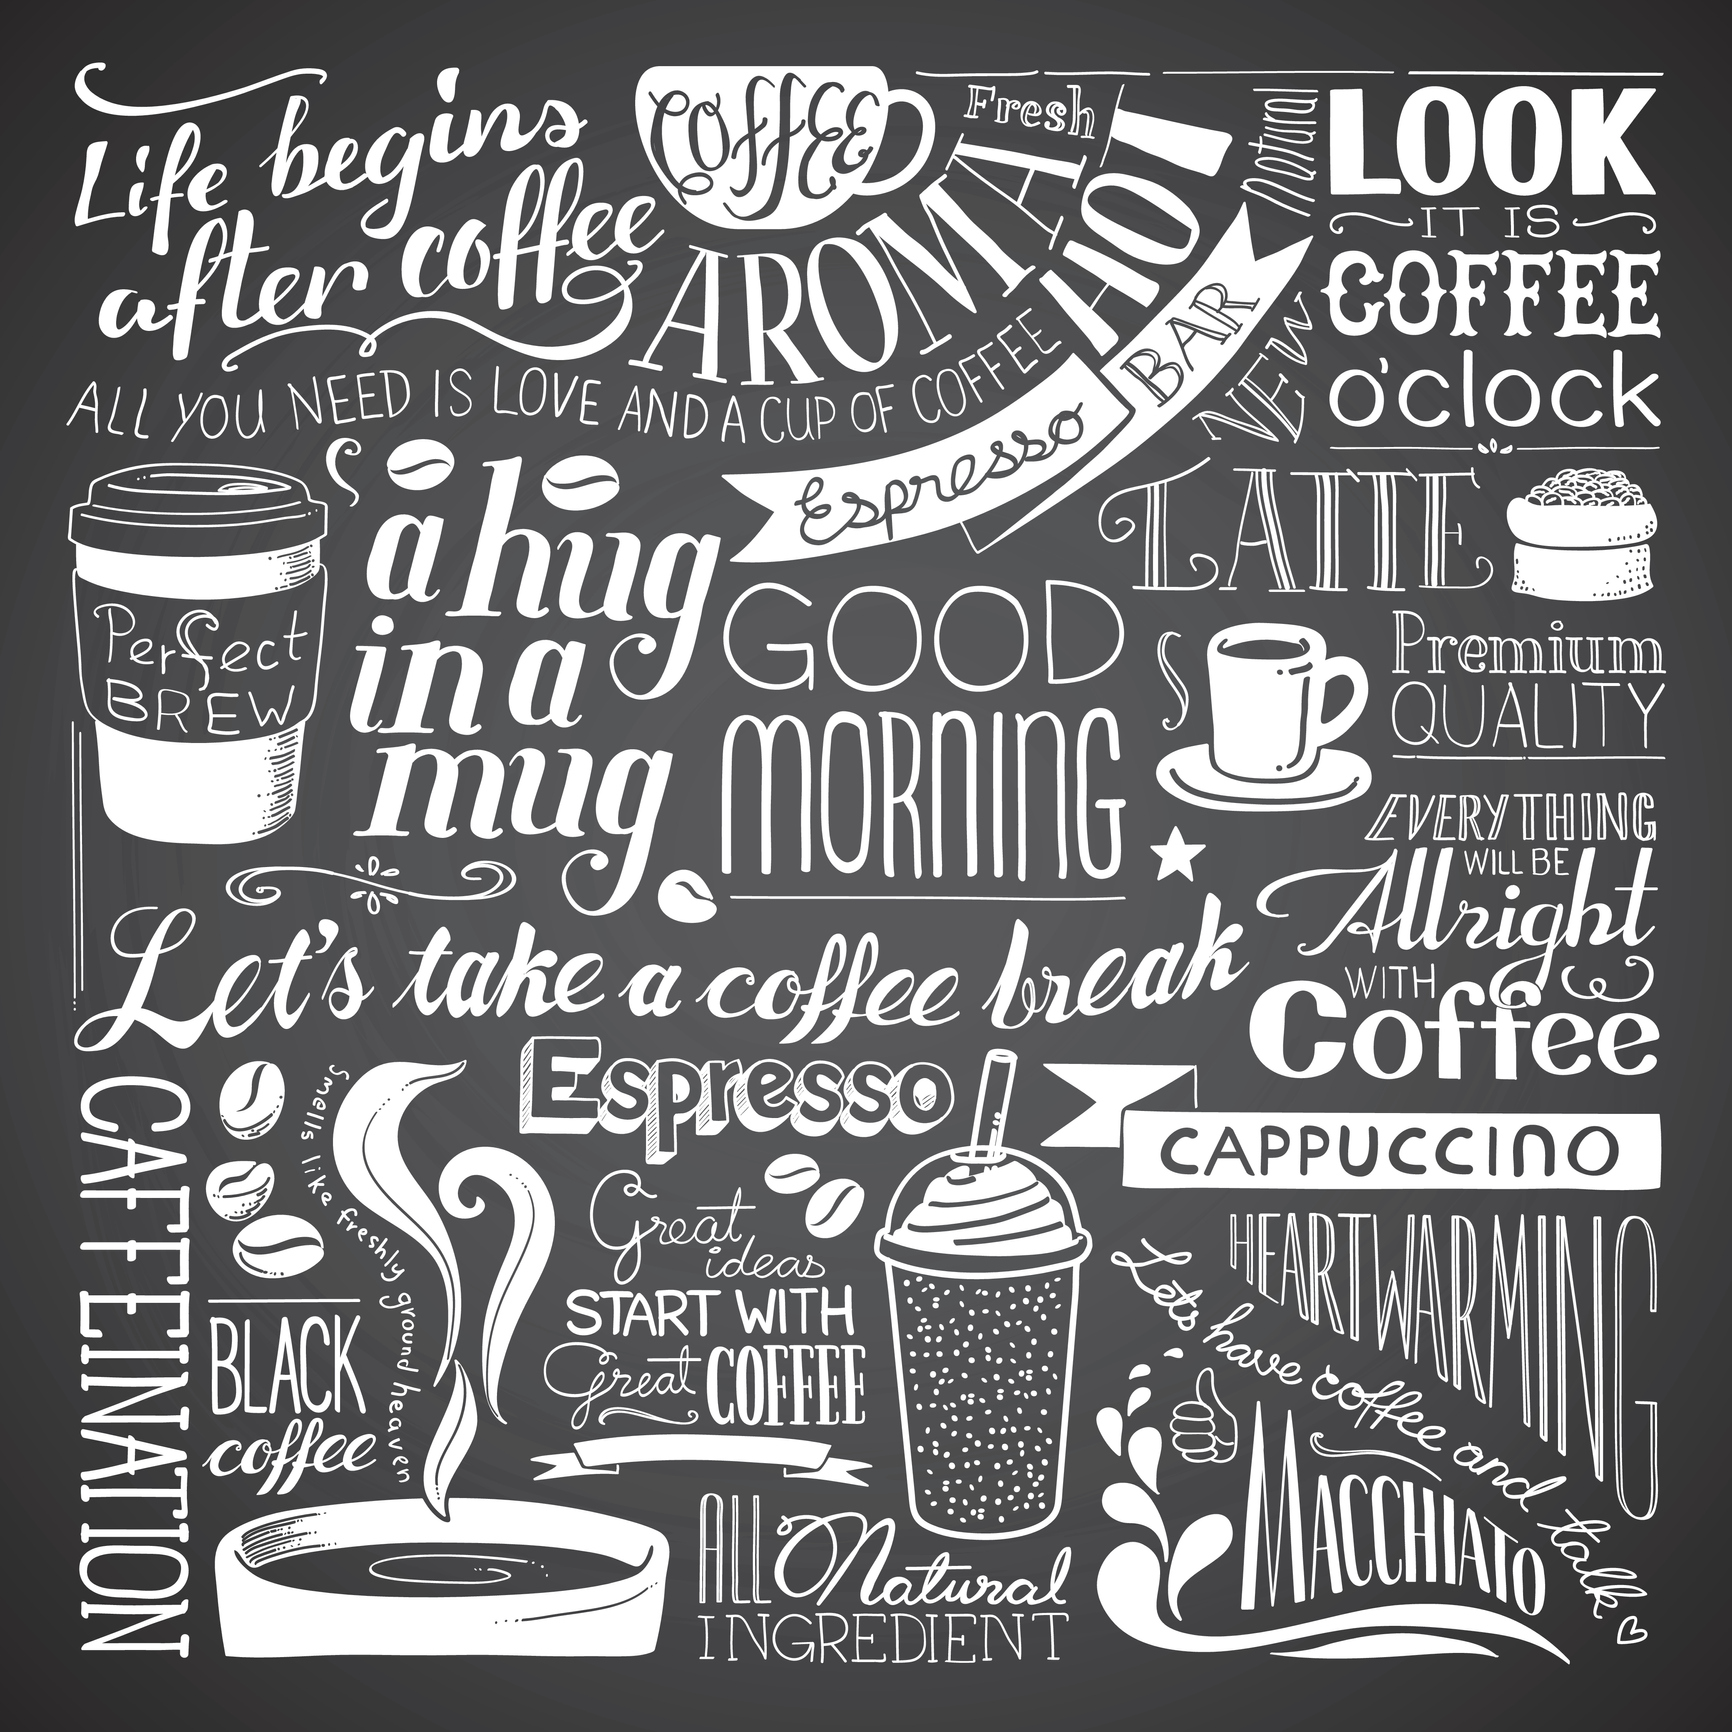 6 Facts about Coffee